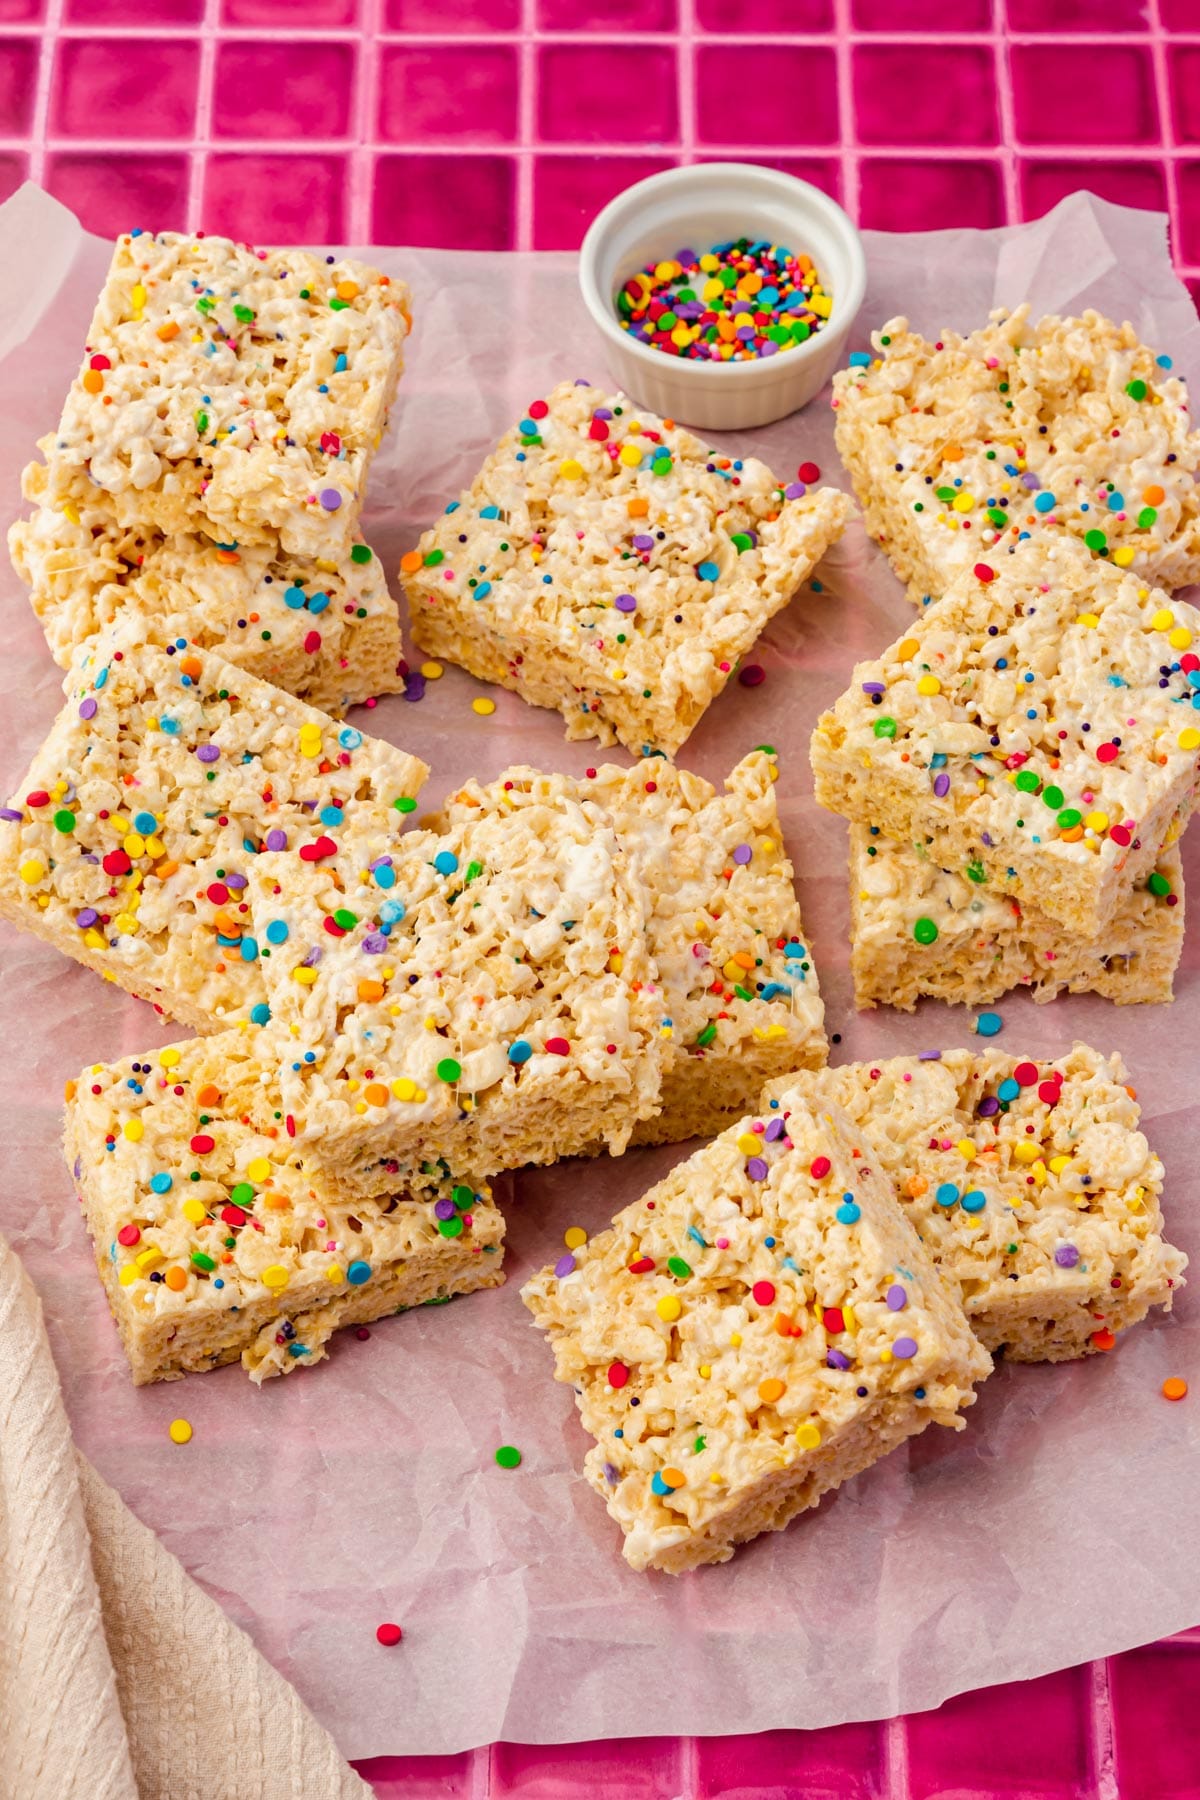 A tray of gluten-free rice krispies treats topped with colorful sprinkles.